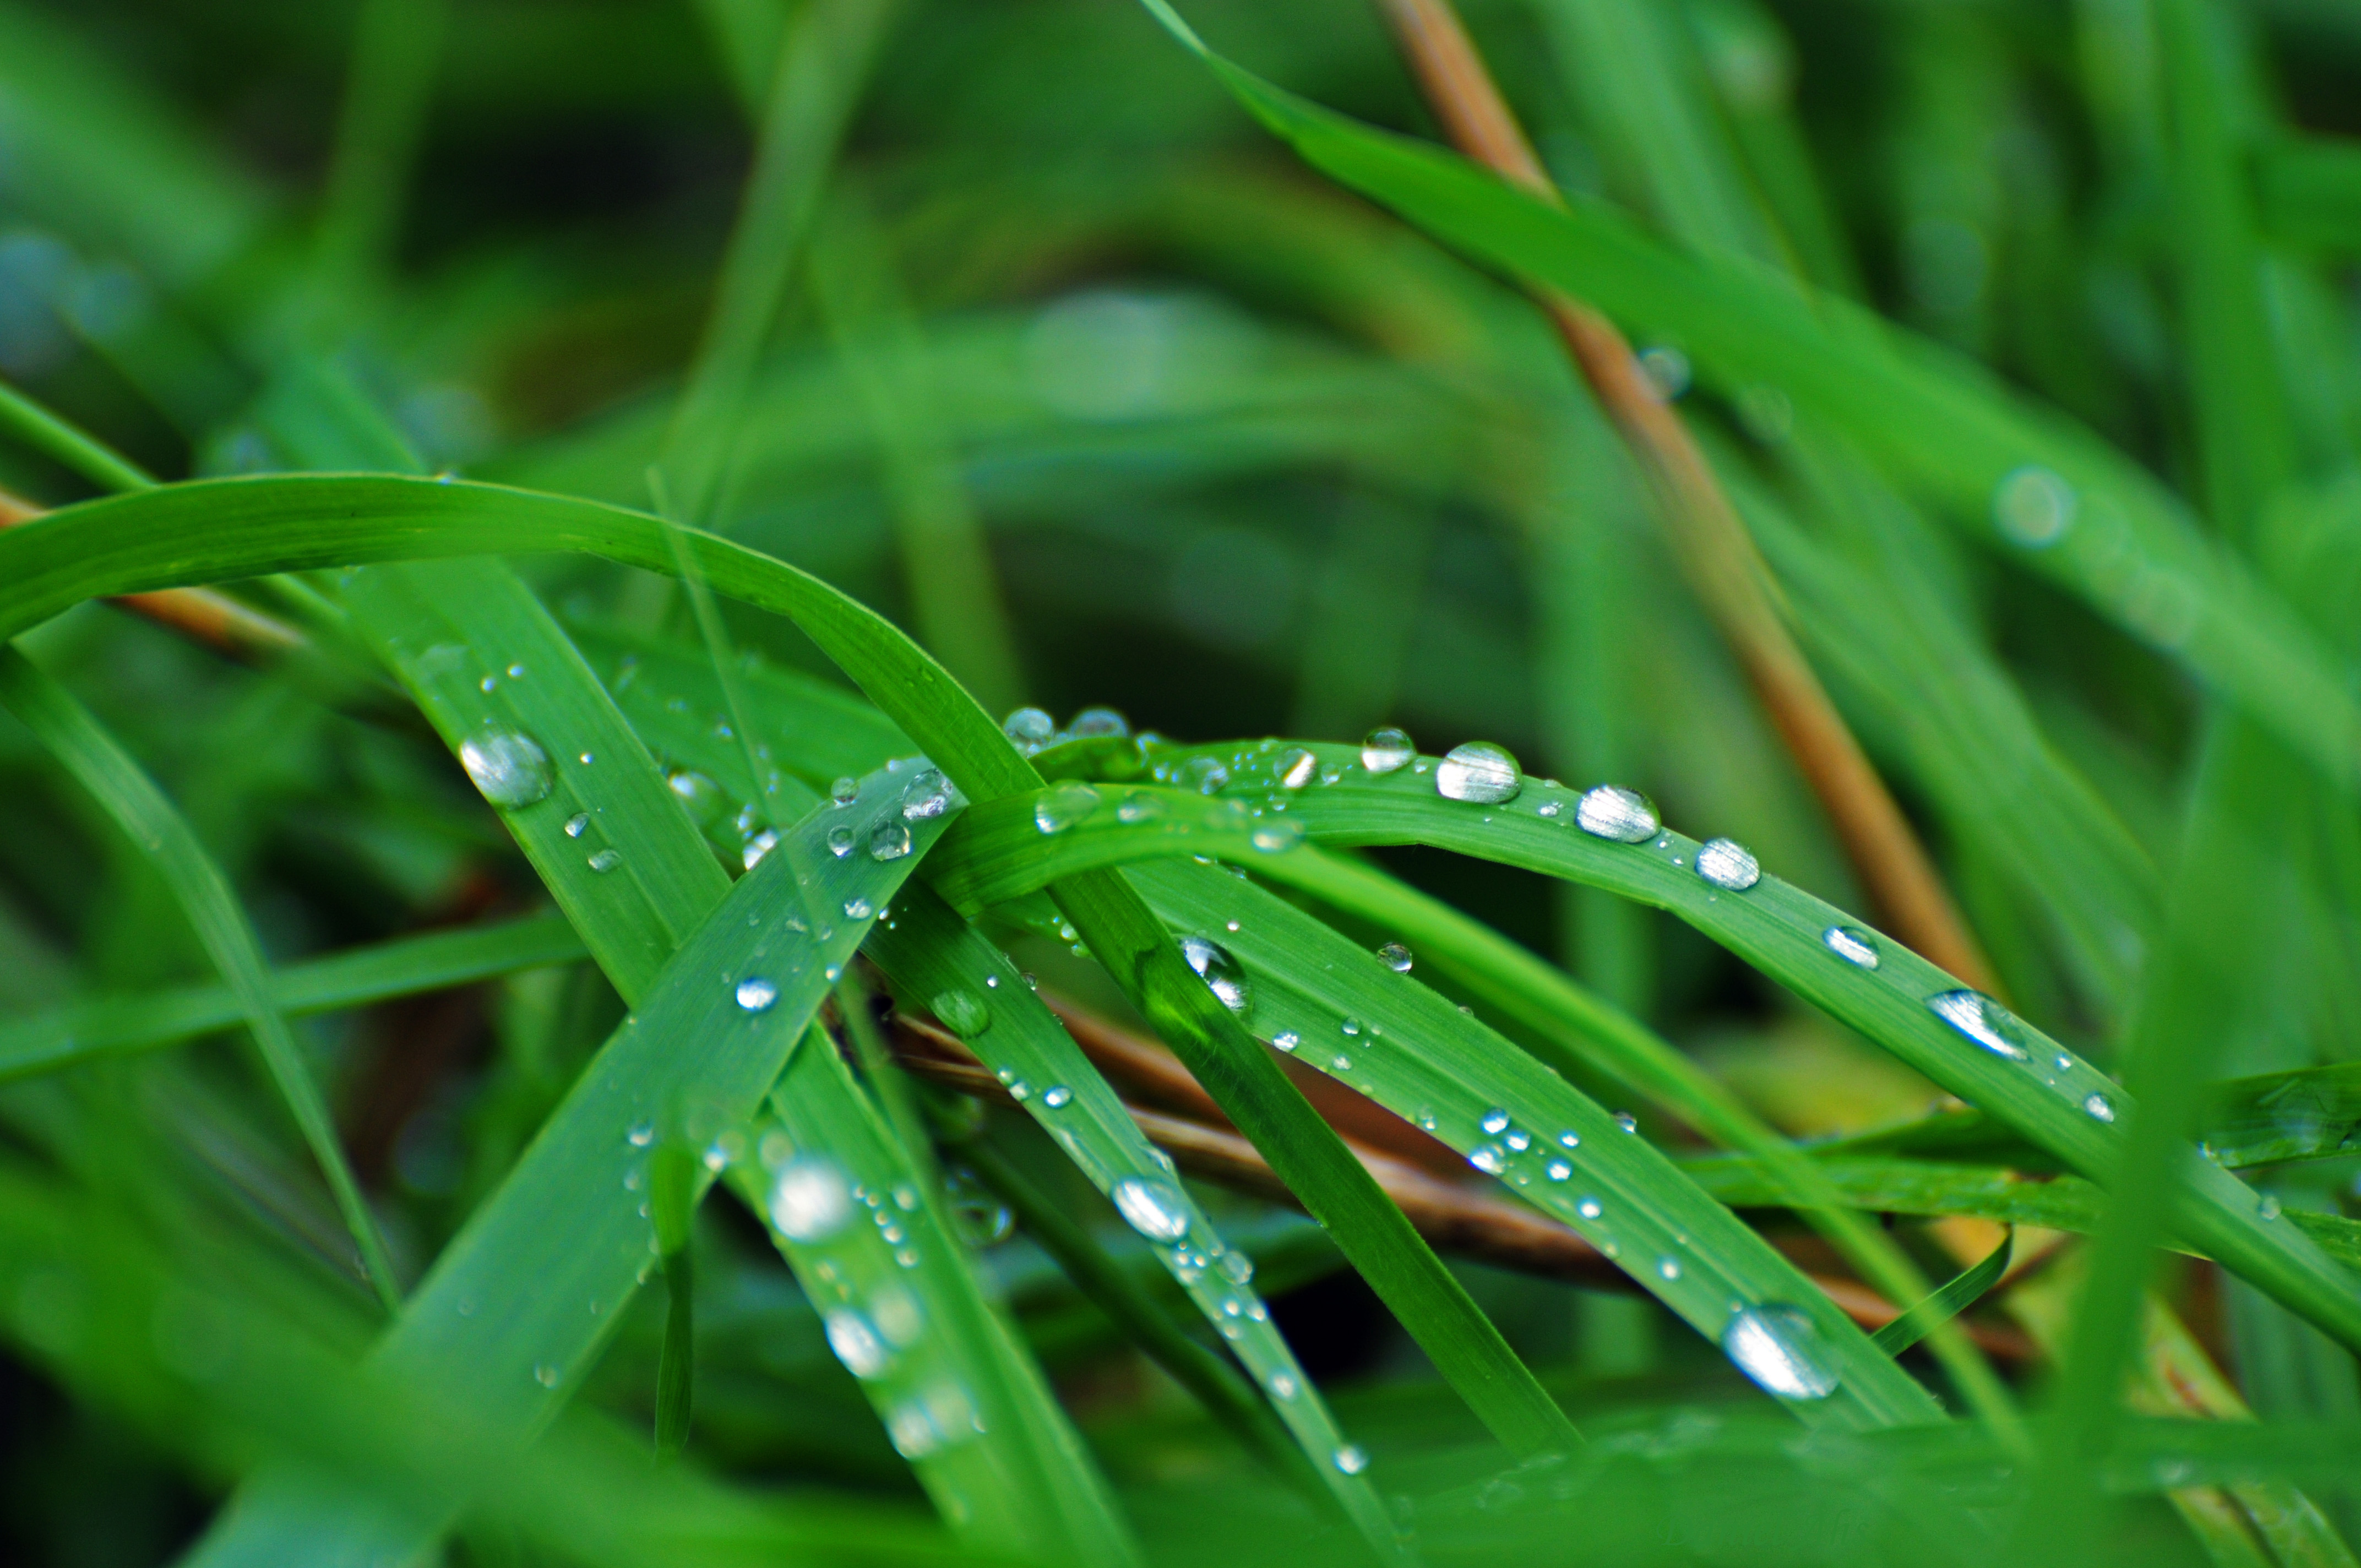 File:Green Grass With Dew.jpg - Wikimedia Commons